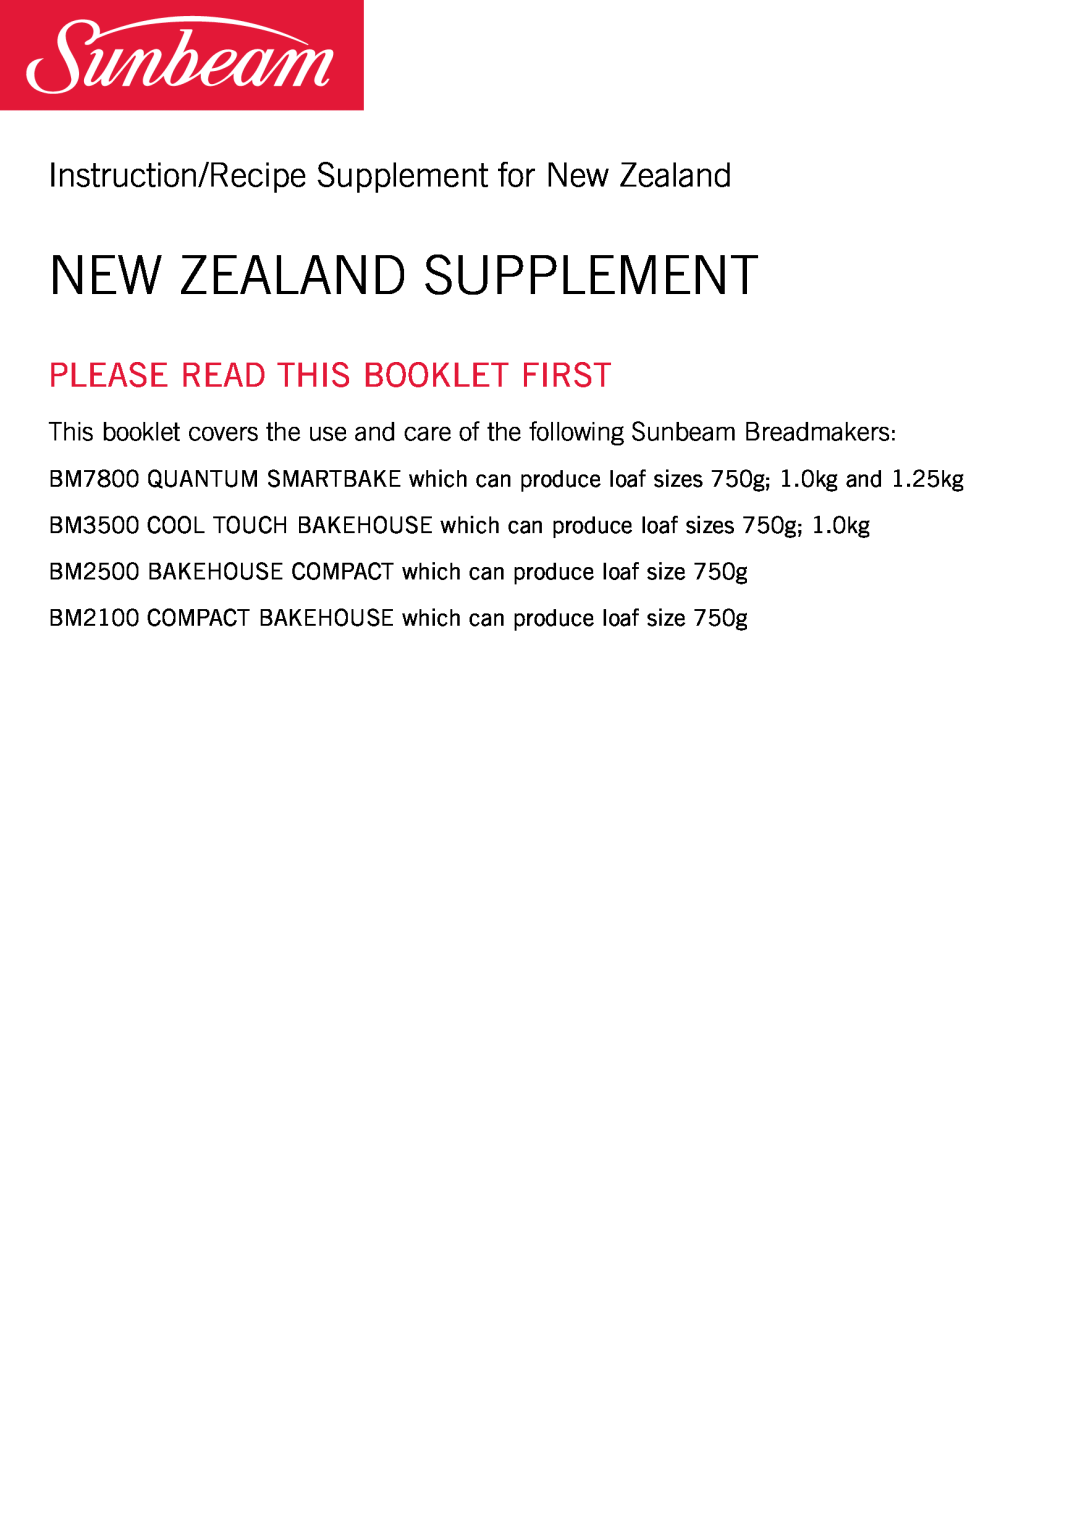 Sunbeam BM7800 manual Instruction/Recipe Supplement for New Zealand, New Zealand Supplement, Please Read This Booklet First 